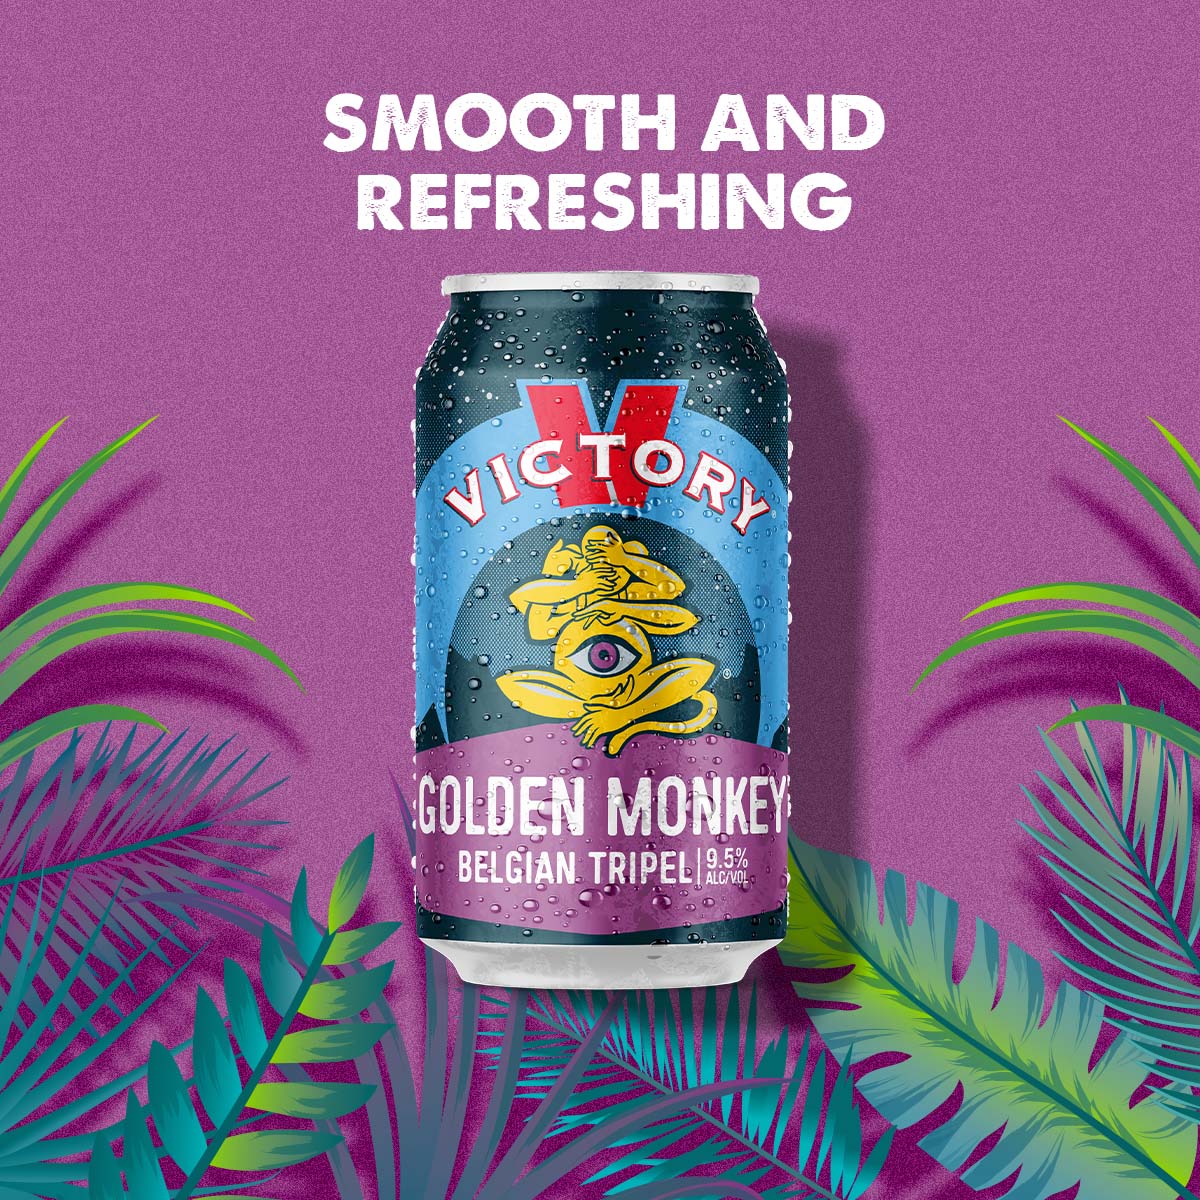 Golden Monkey: Smooth and Refreshing